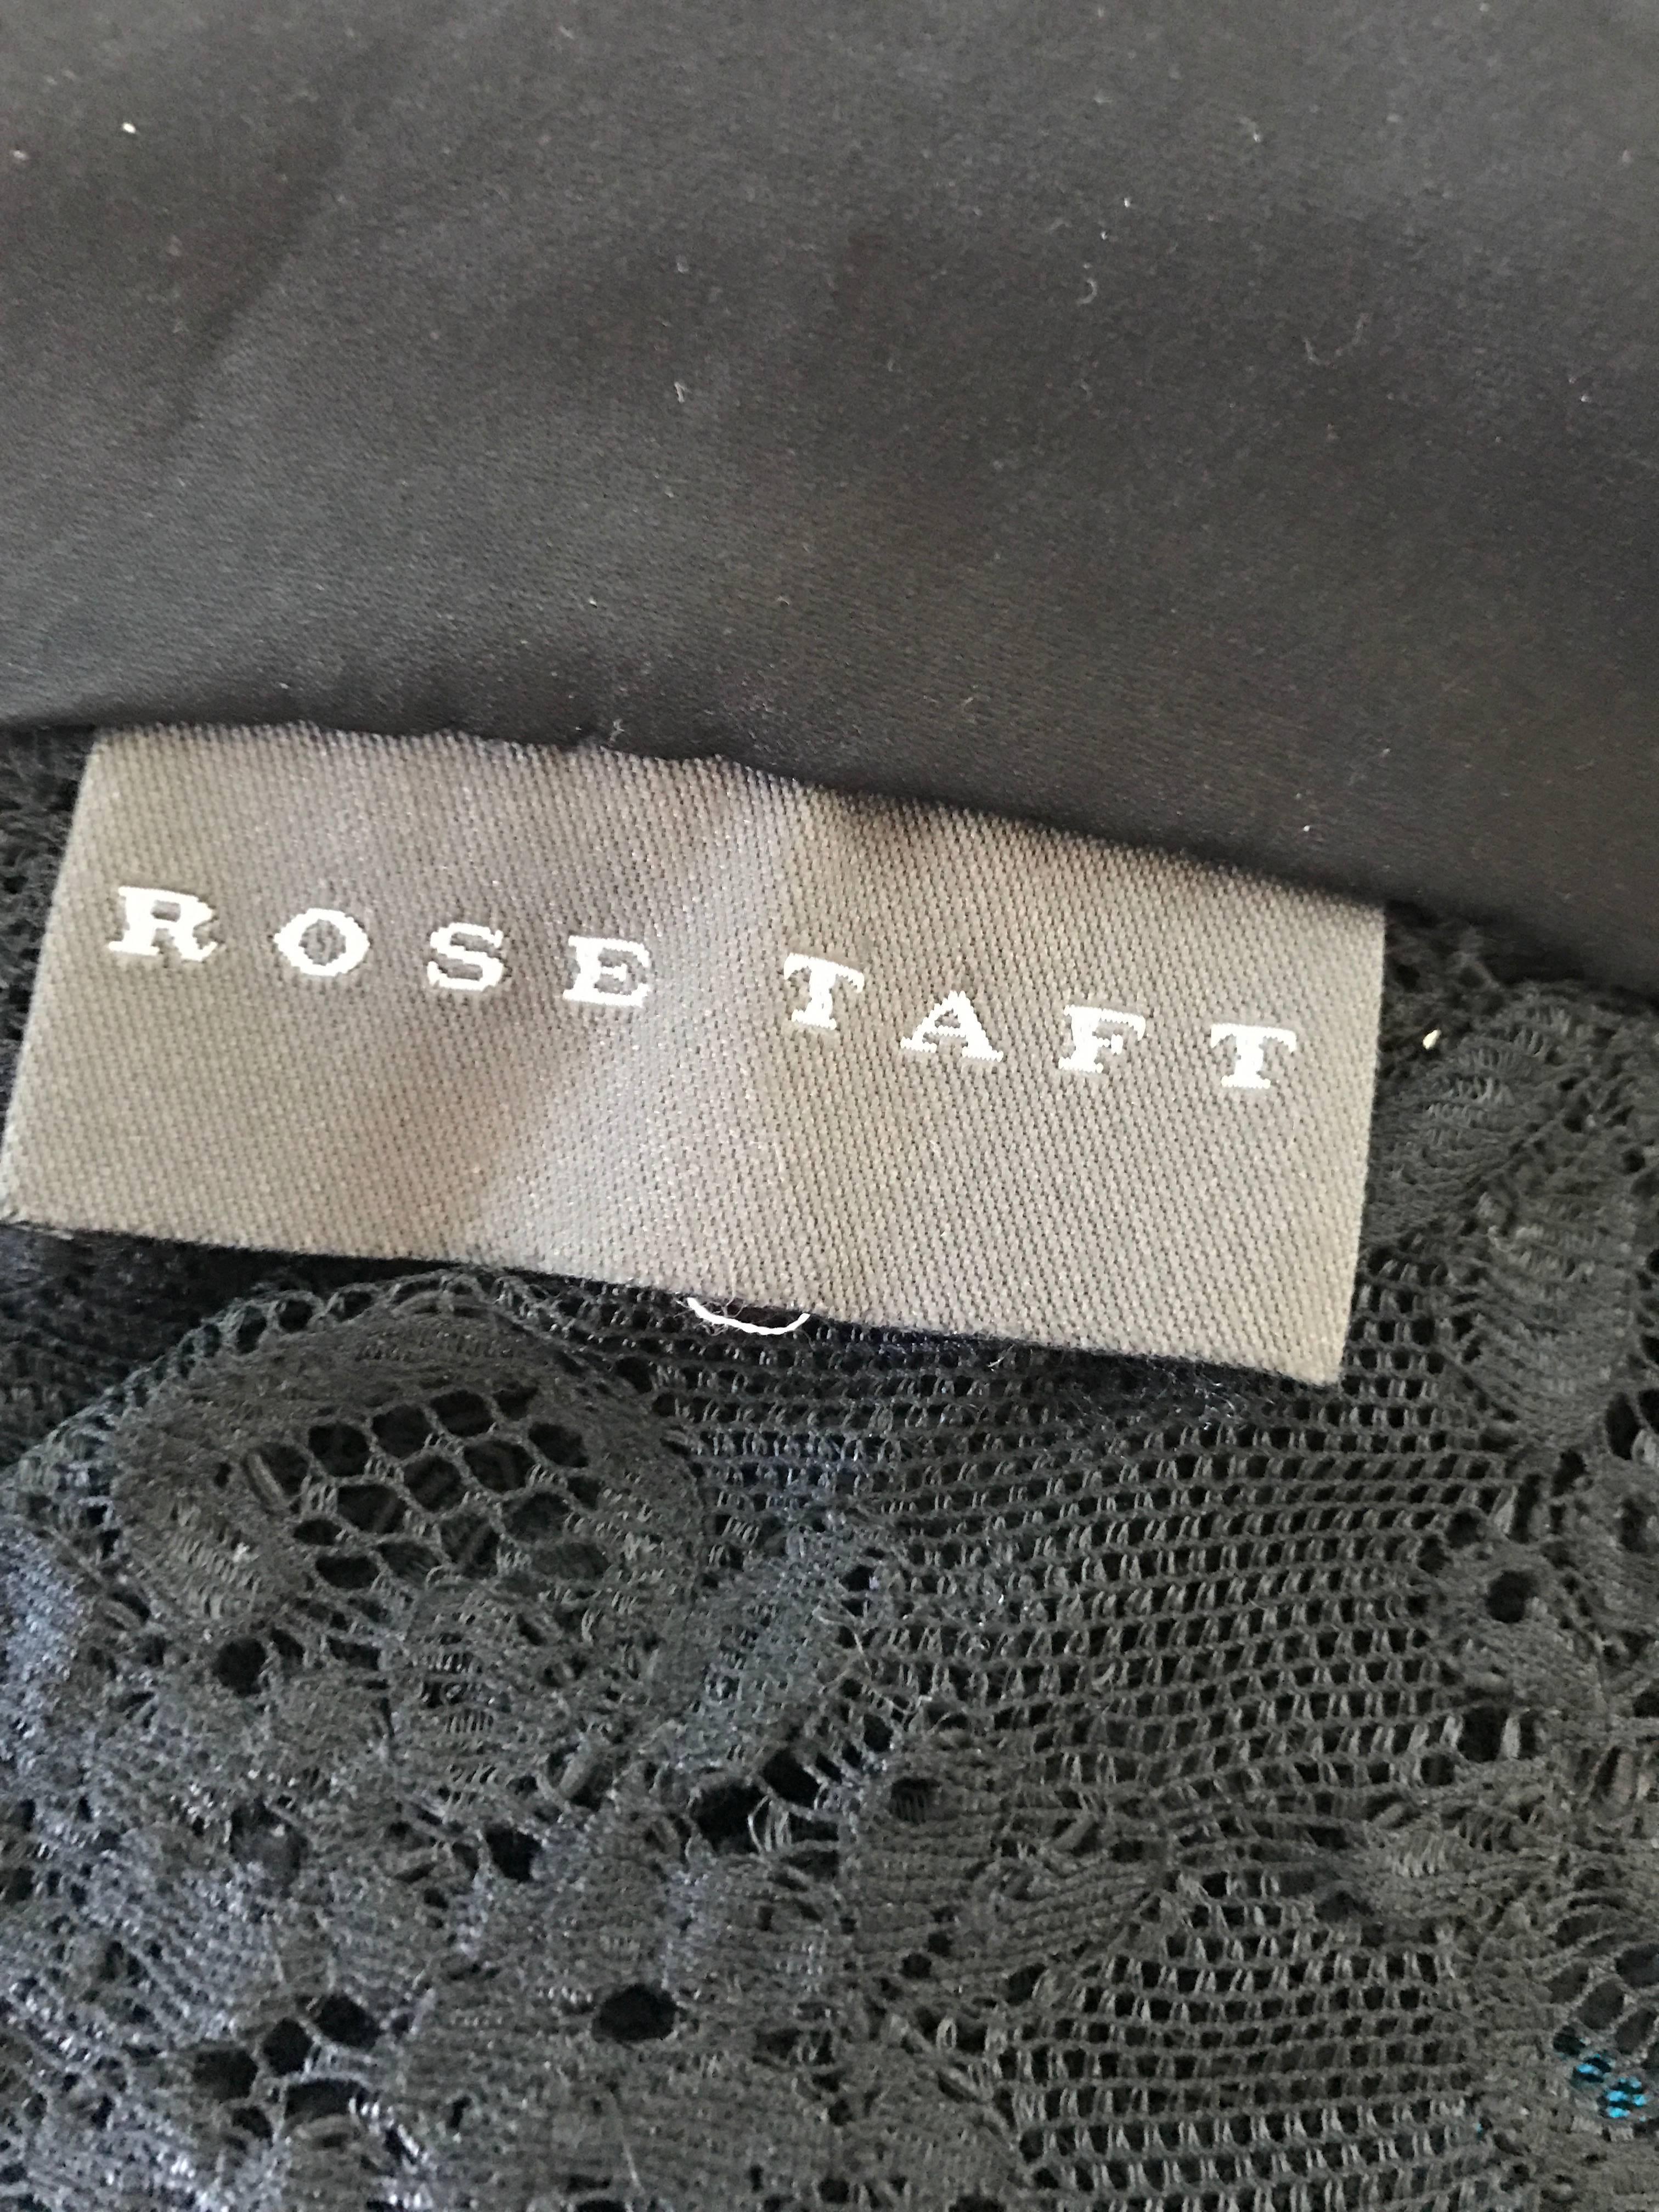 Vintage Rose Taft Couture 1990s Black Chantilly French Lace 3/4 Sleeve Blouse For Sale 5